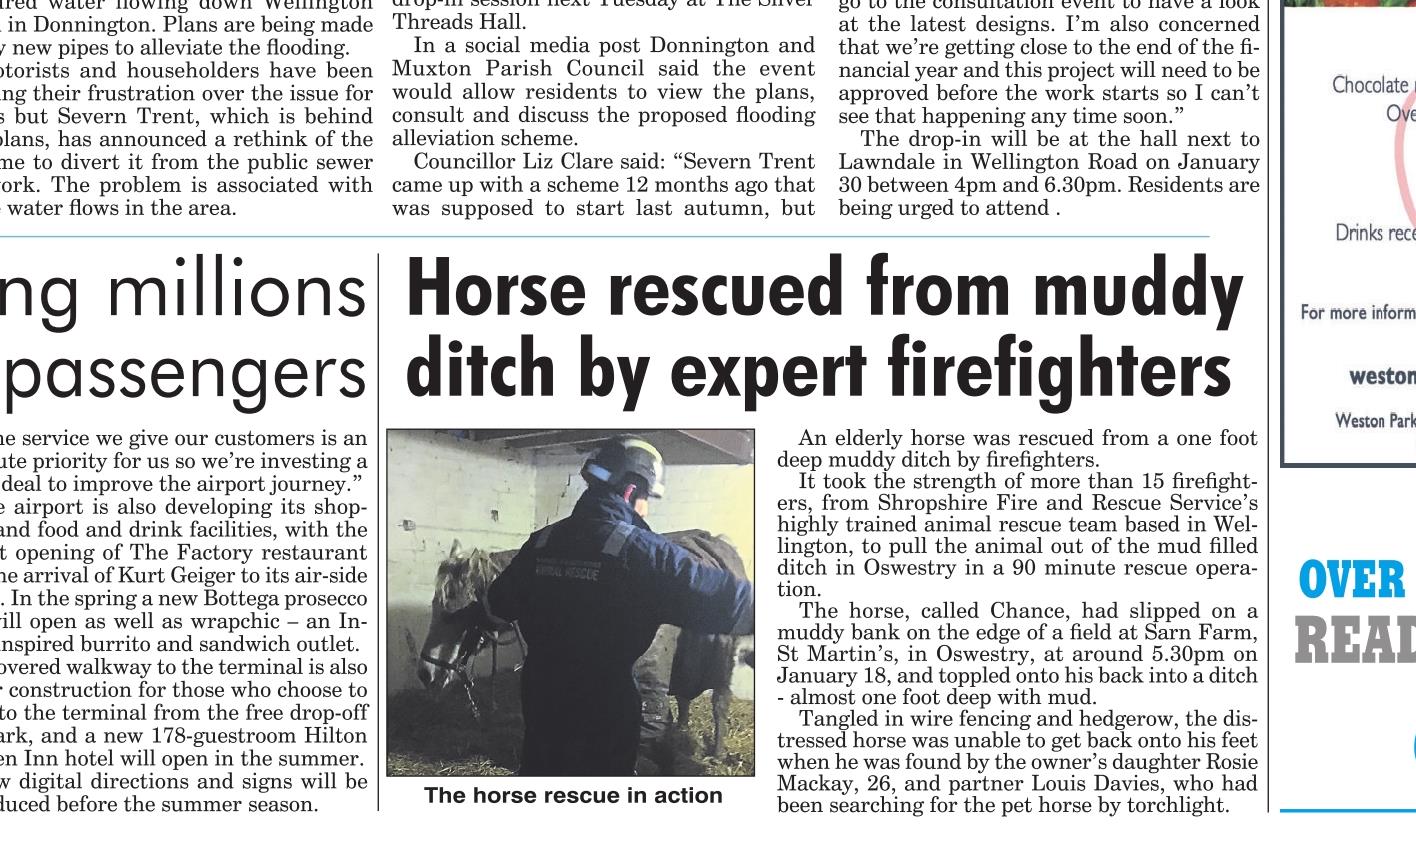 Shropshire Star report our story on the horse rescue